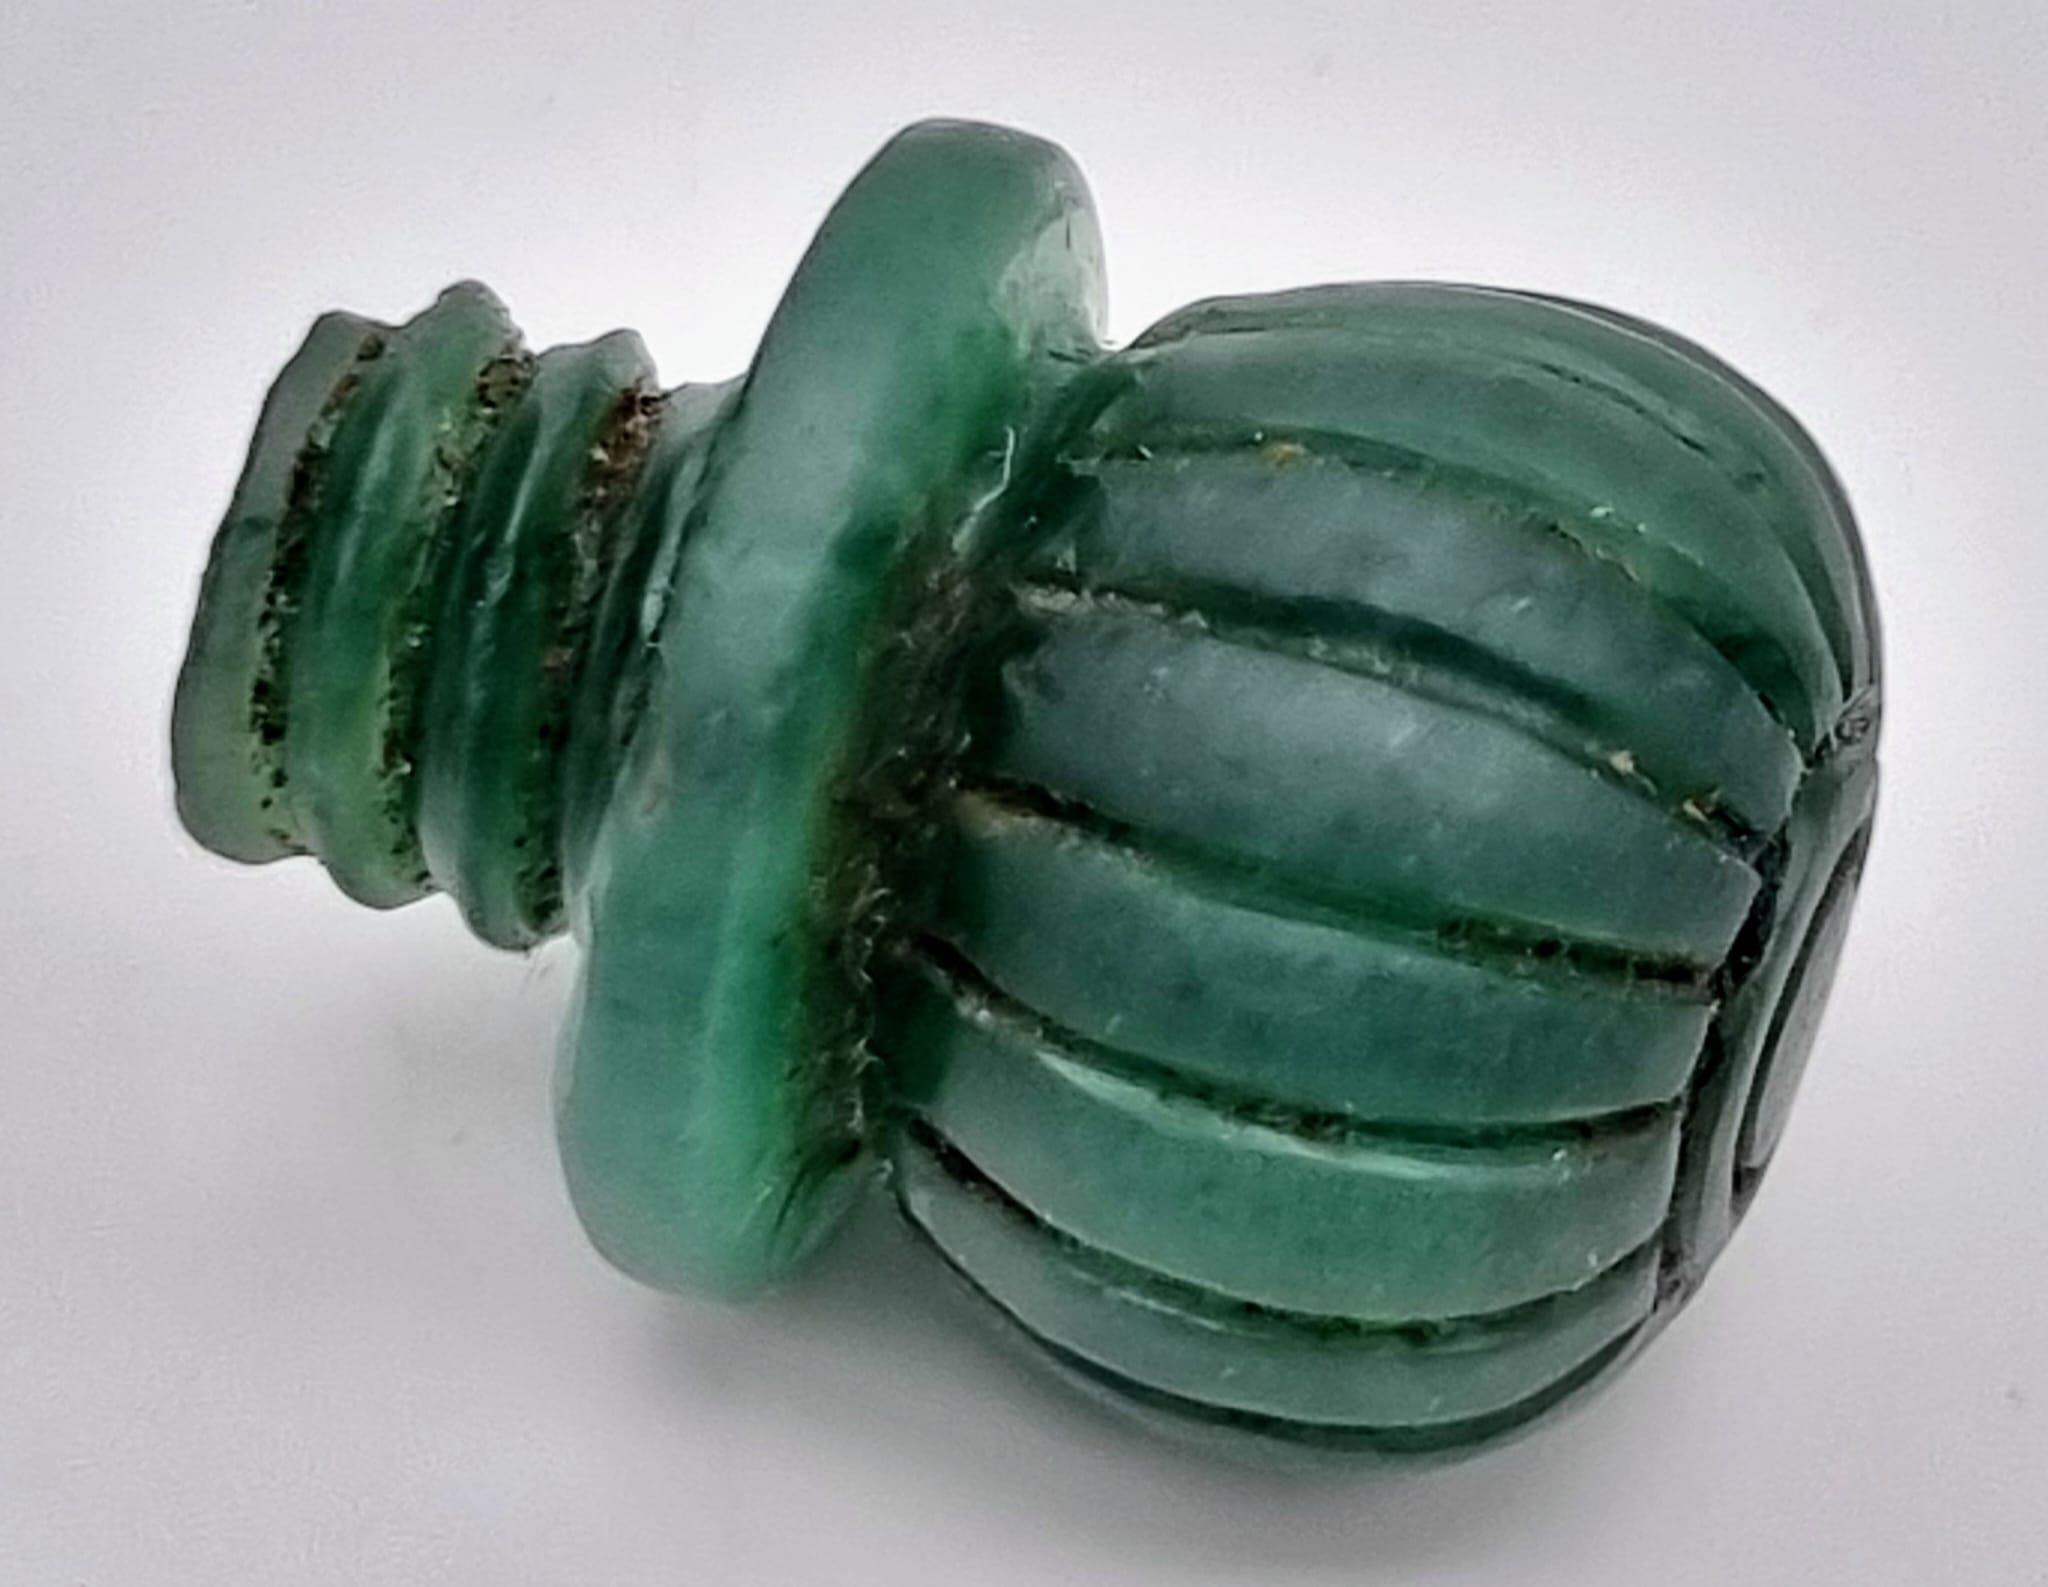 An Exquisite Antique Russian Green Jade Swan Perfume Bottle. 12 x 8cm. - Image 7 of 8